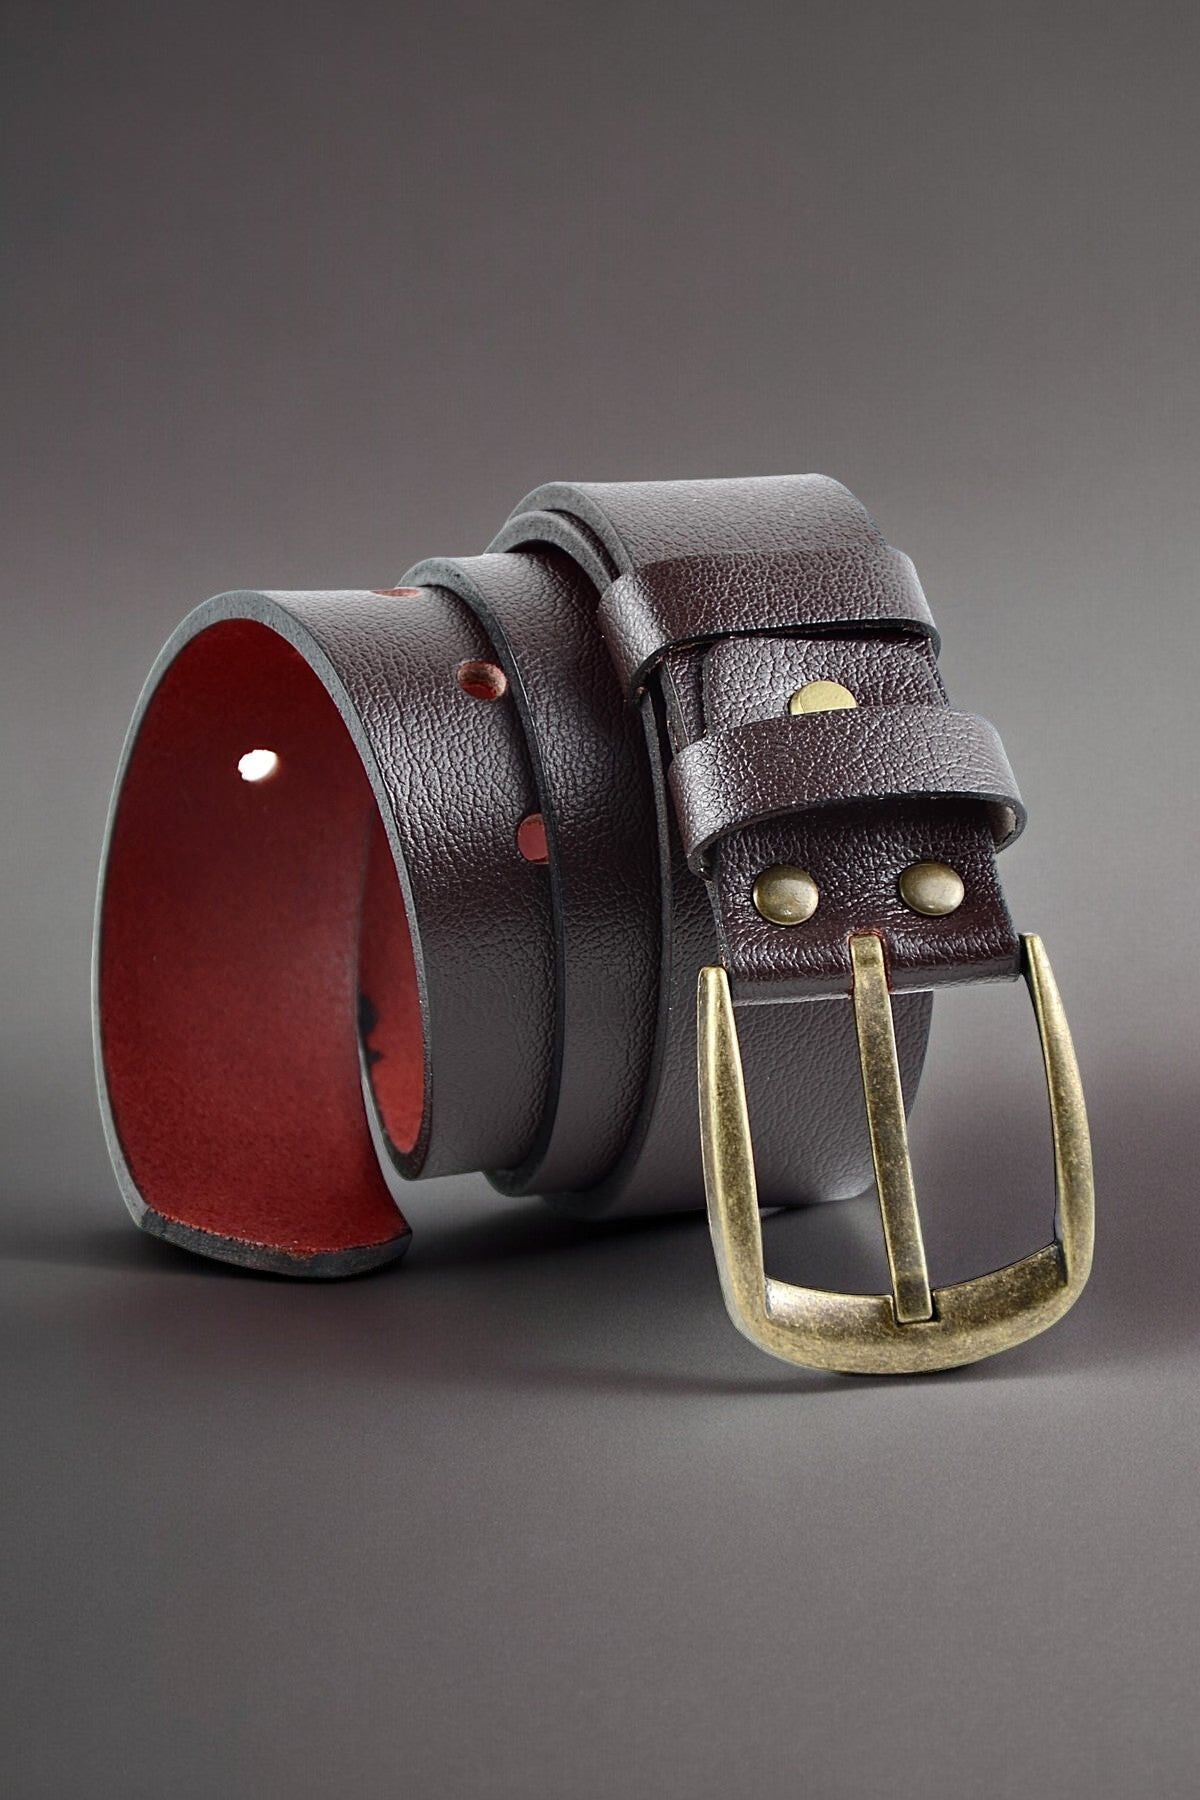 Handmade Leather Belt with Different Color Options  99percenthandmade 32" - 34" Waist inches (70cm-80cm)-Small Brown 